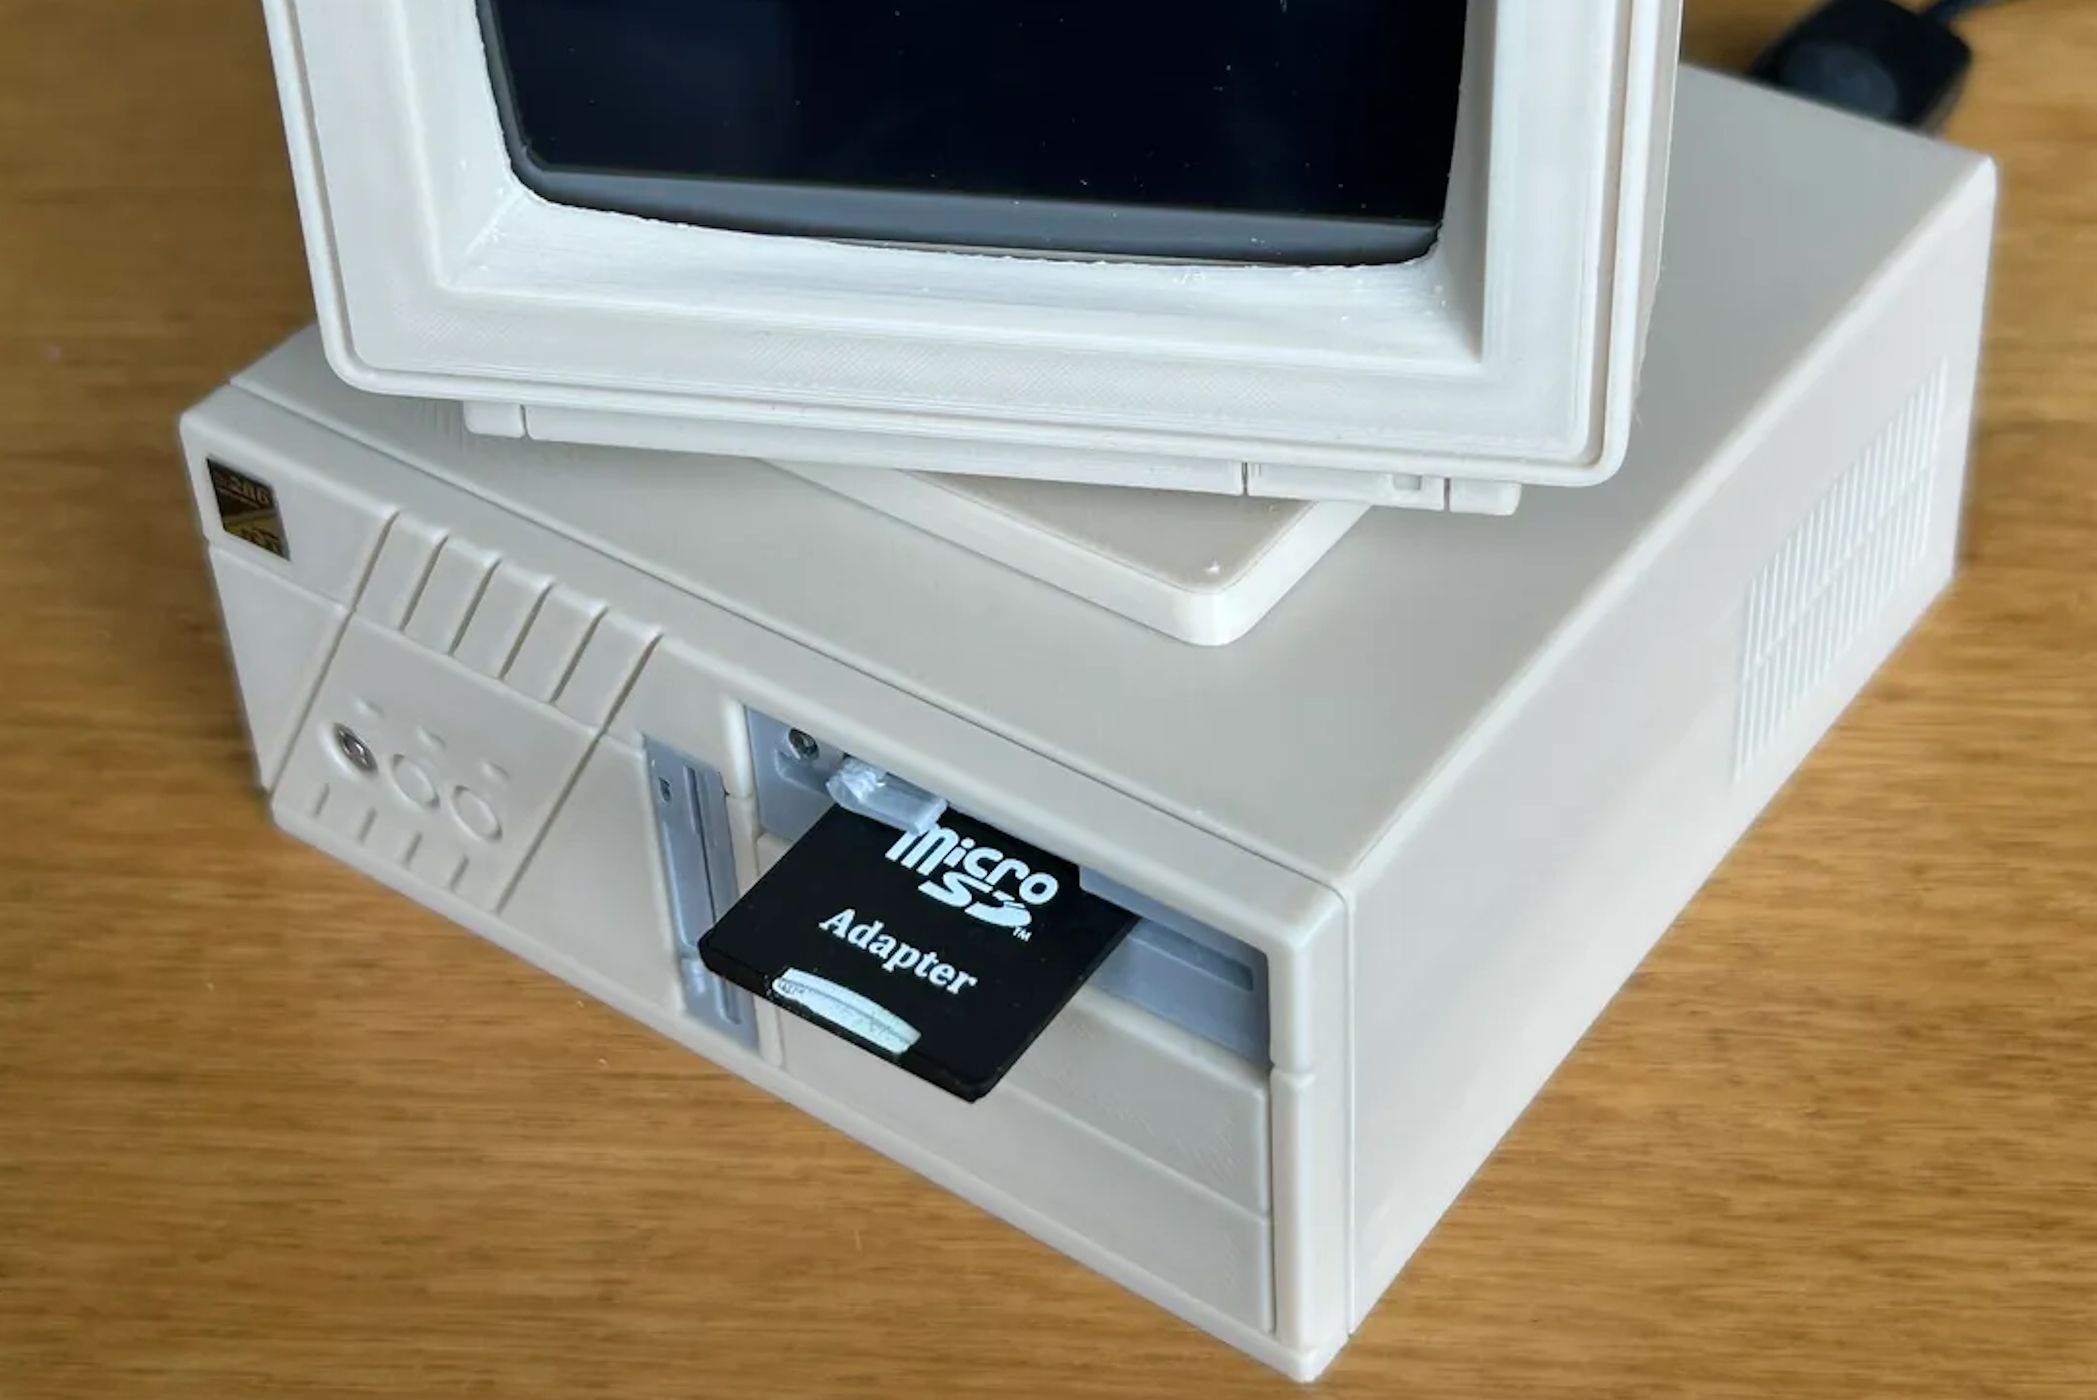 The SD drive on the Retro PC